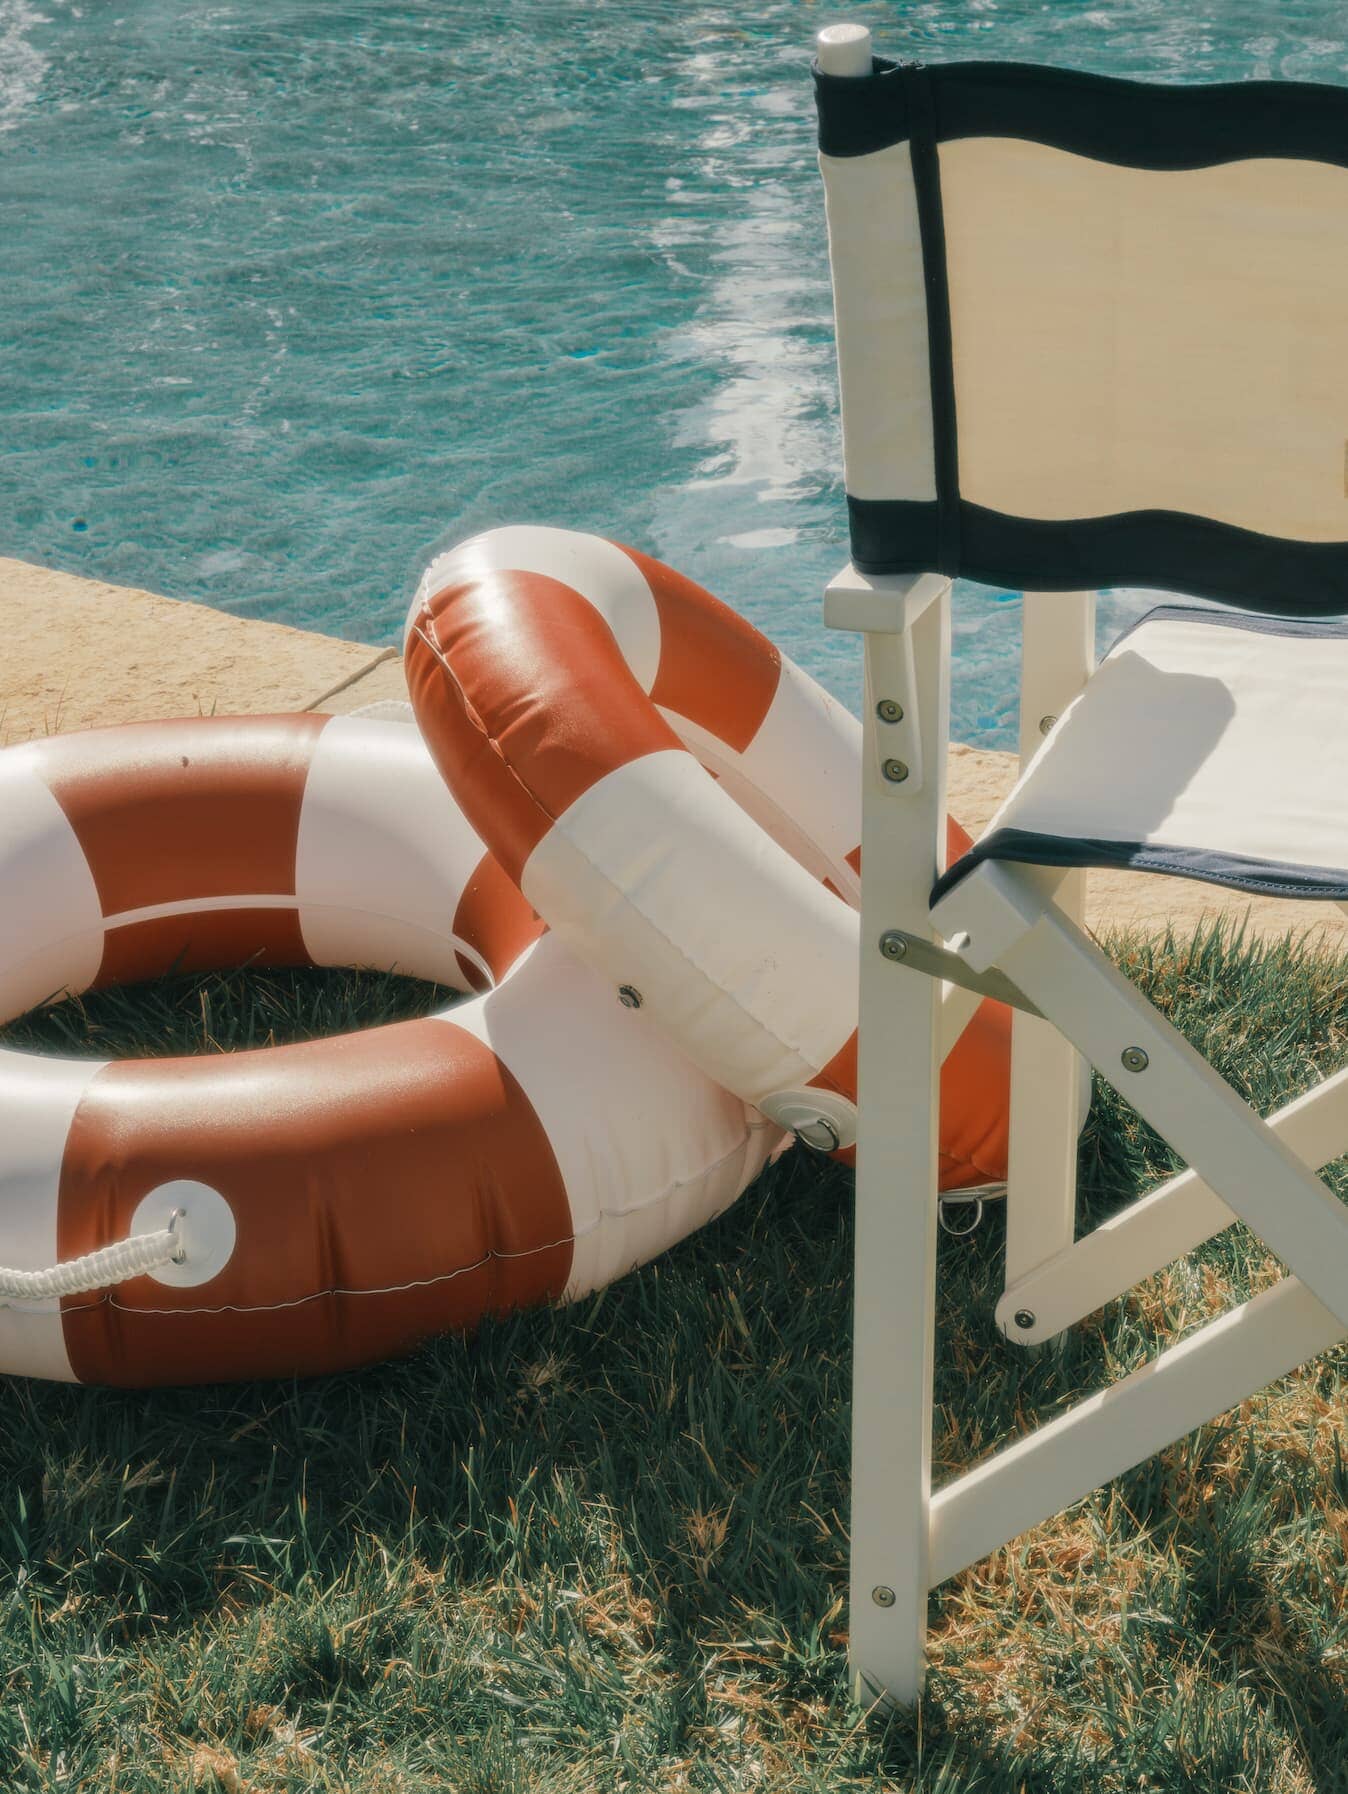 Riviera white directors chair next to a pool